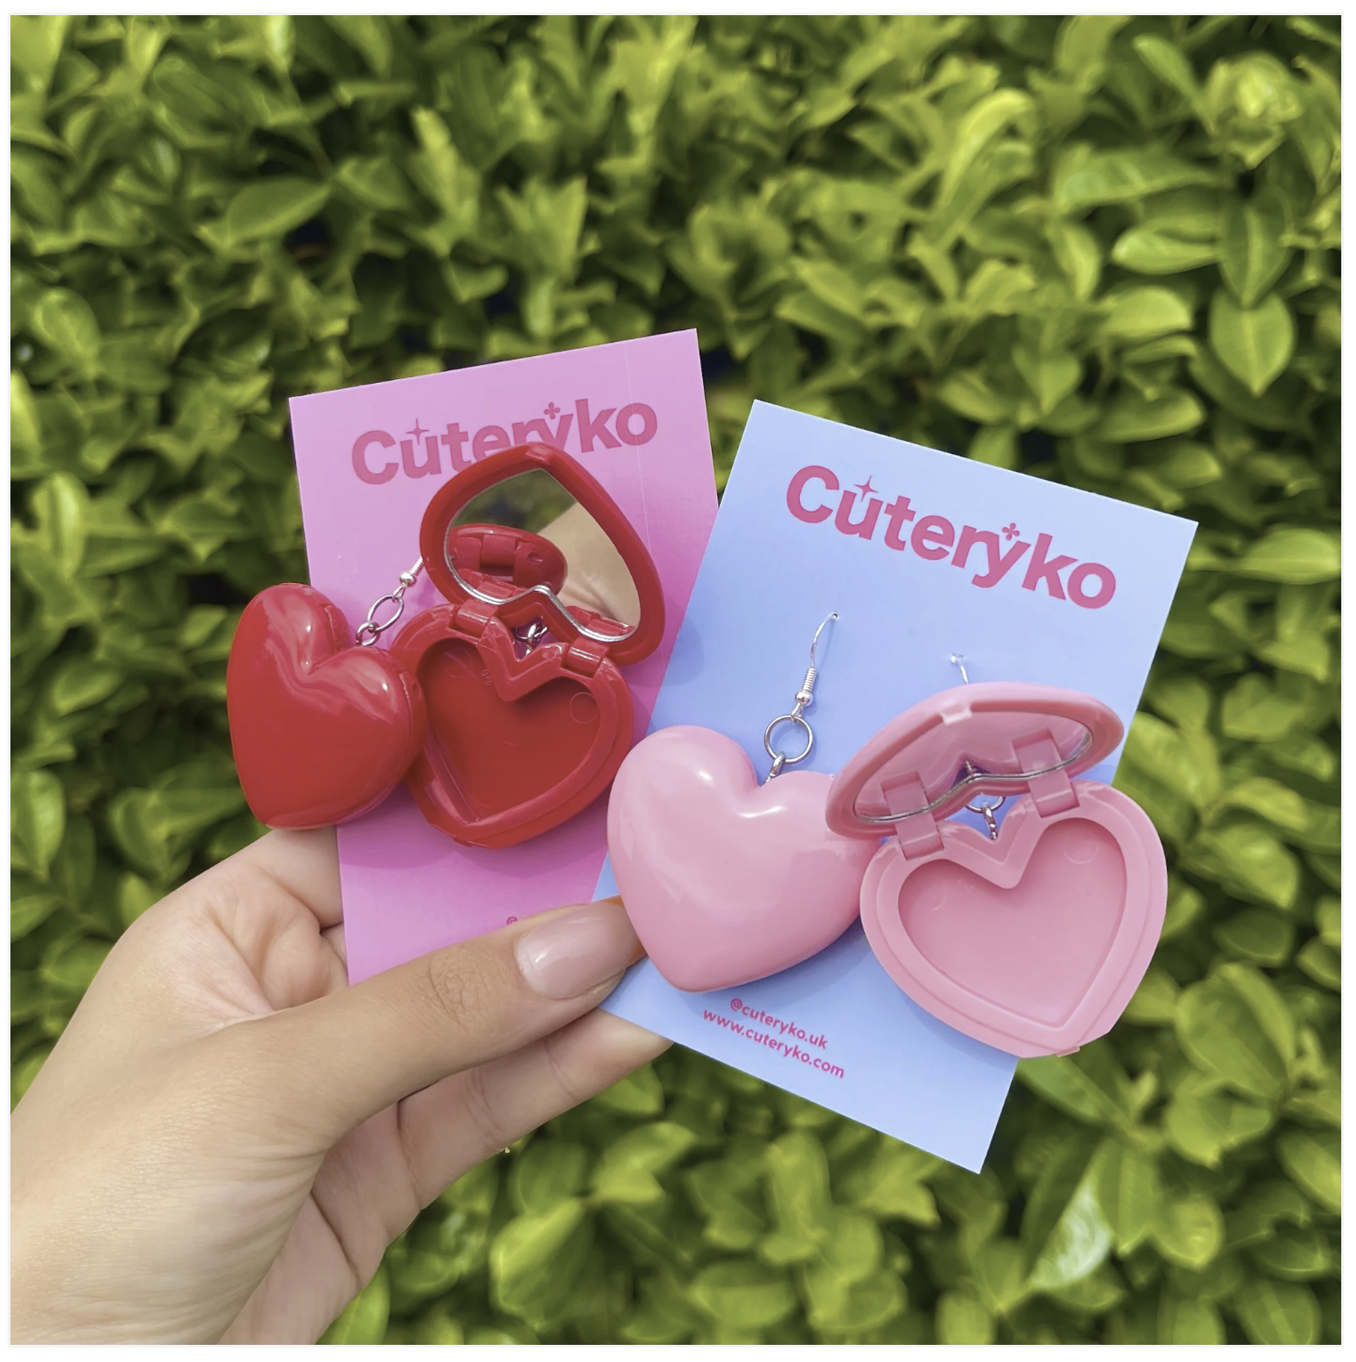 Two sets of plastic love heart shaped earrings which are open to show a hollow and mirror. One pair is red and the other pair is pink. 